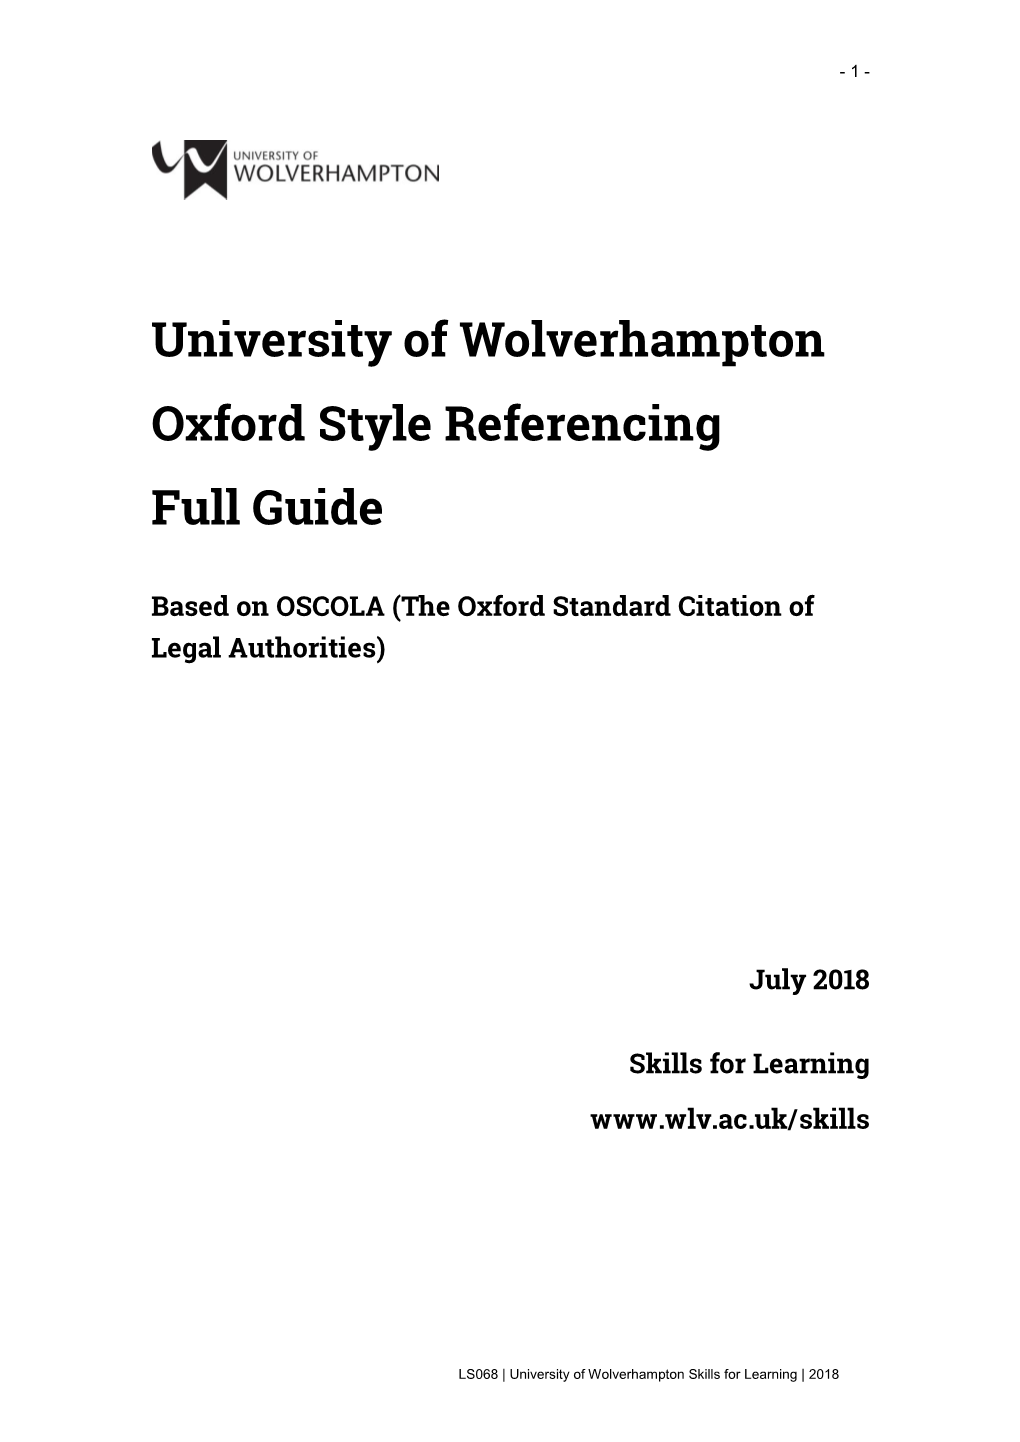 University of Wolverhampton Oxford Style Referencing Full Guide